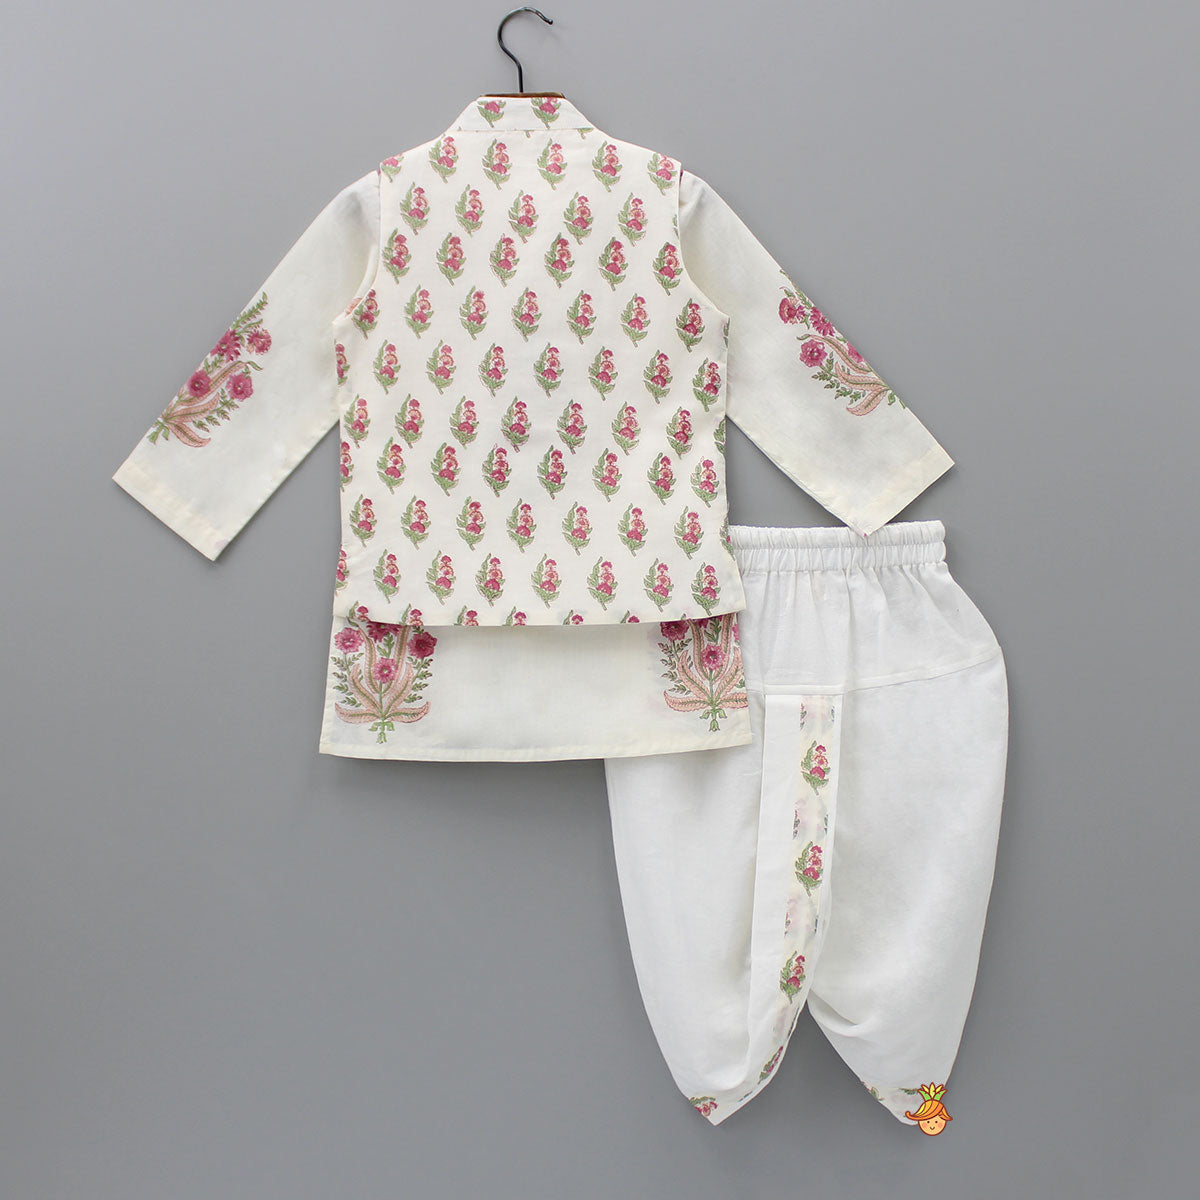 Floral Printed Kurta With Handworked Jacket And Dhoti.